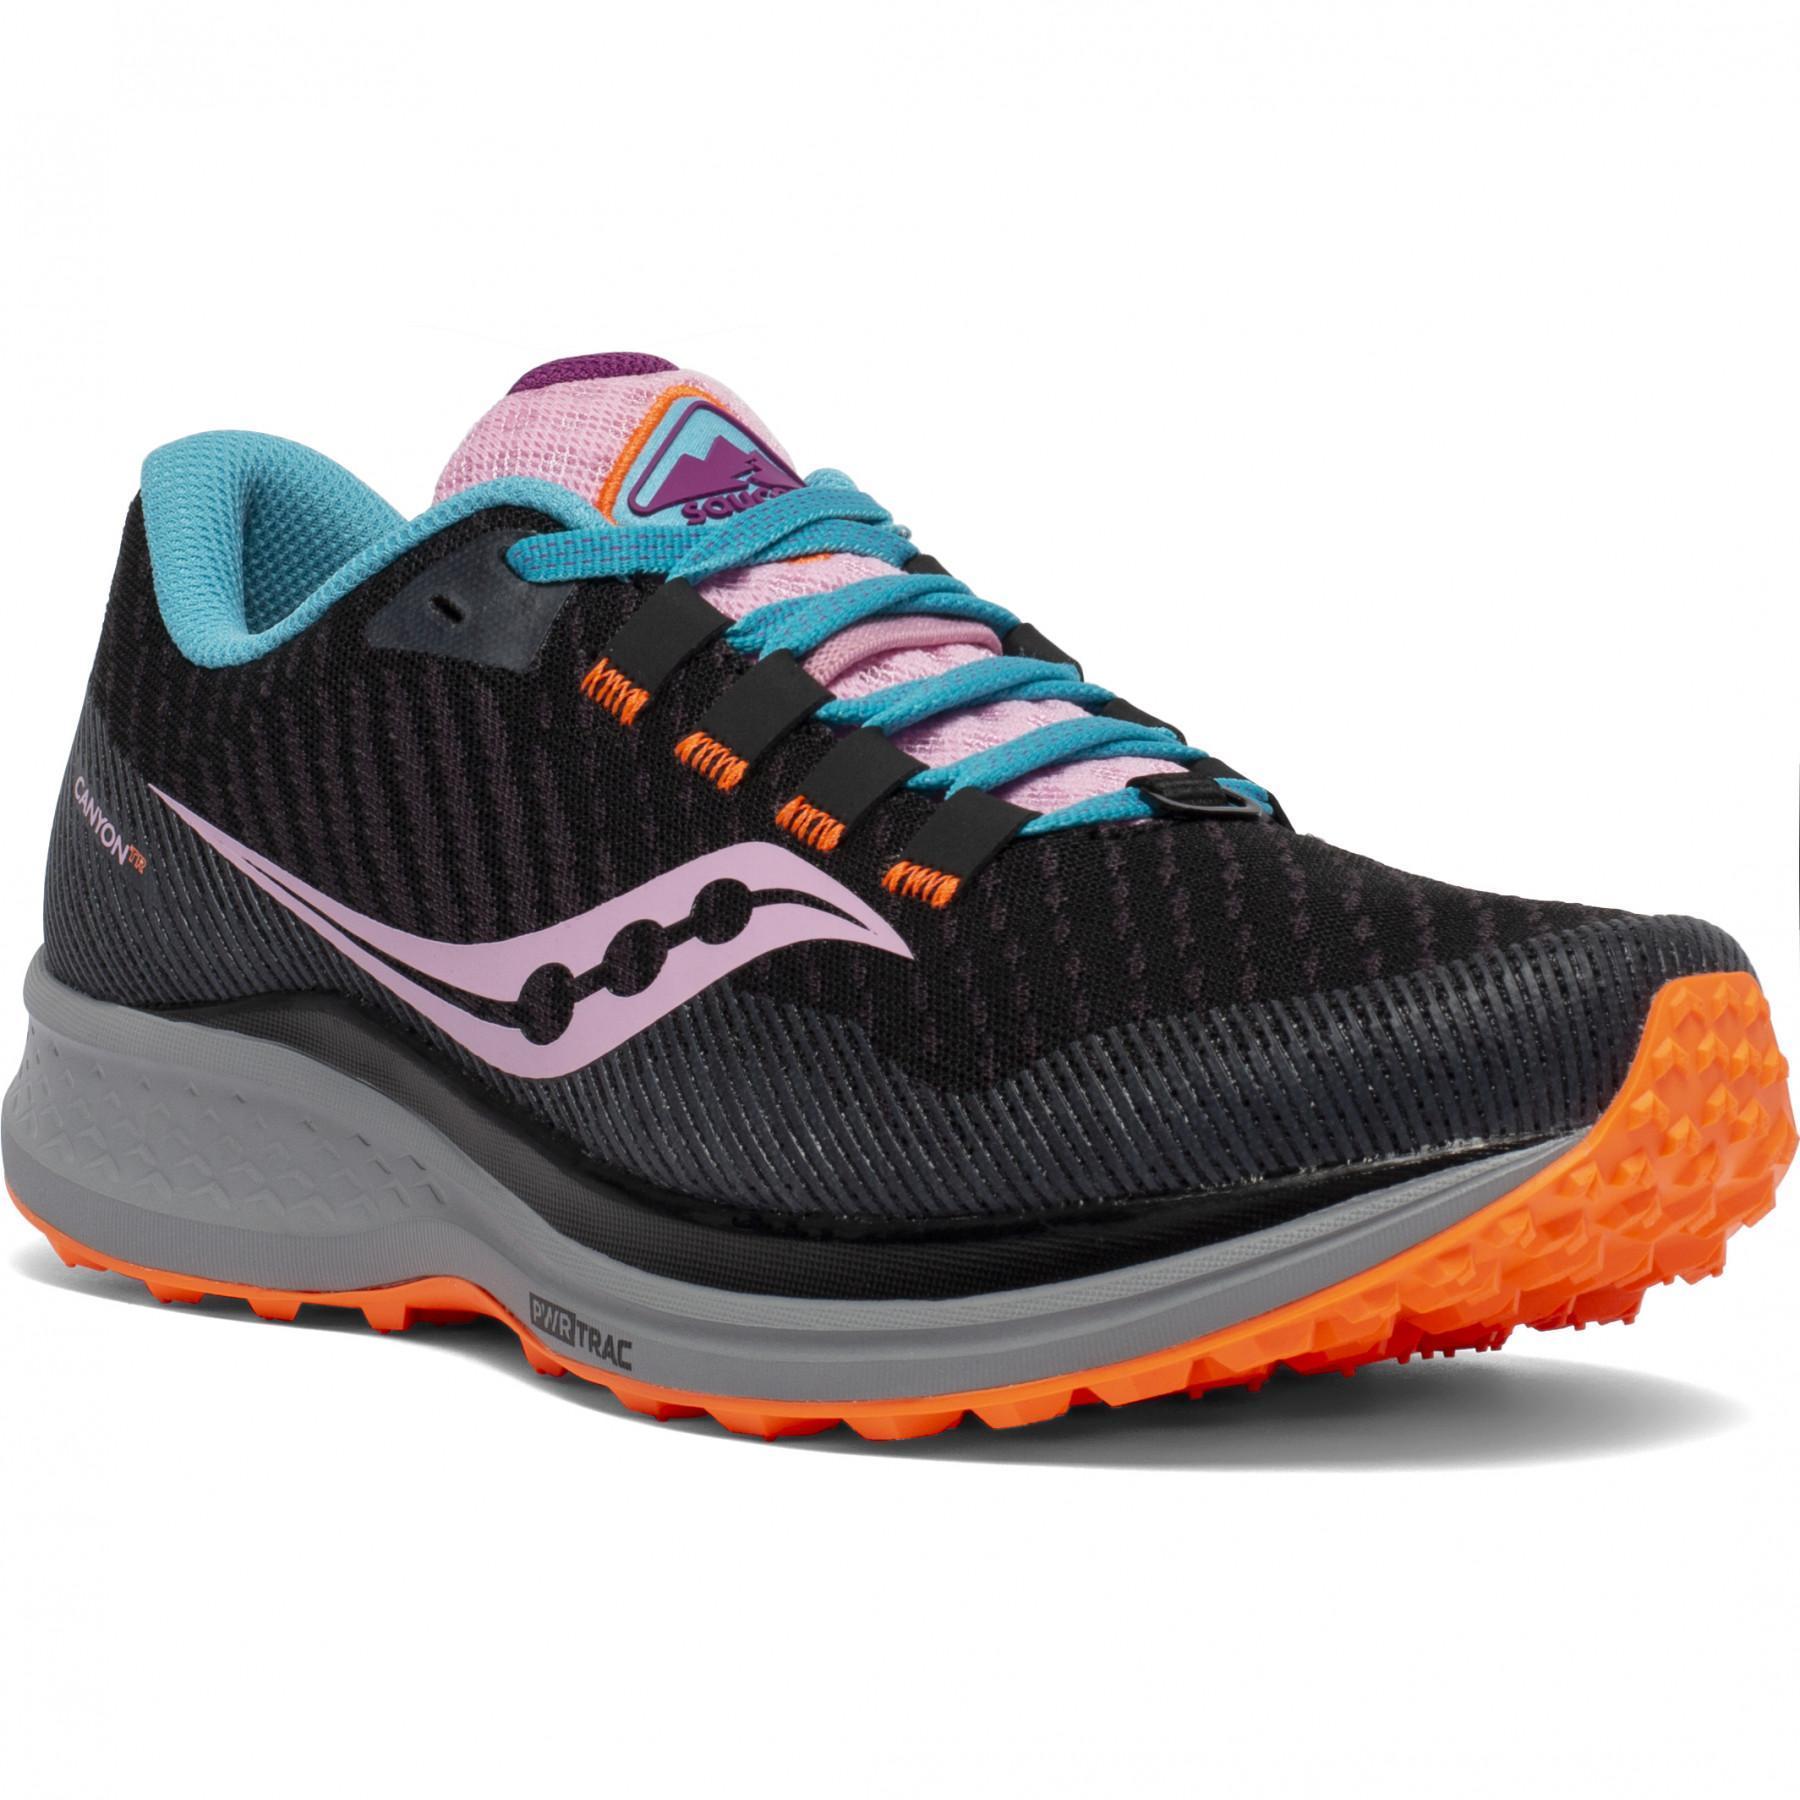 Women's shoes Saucony canyon tr